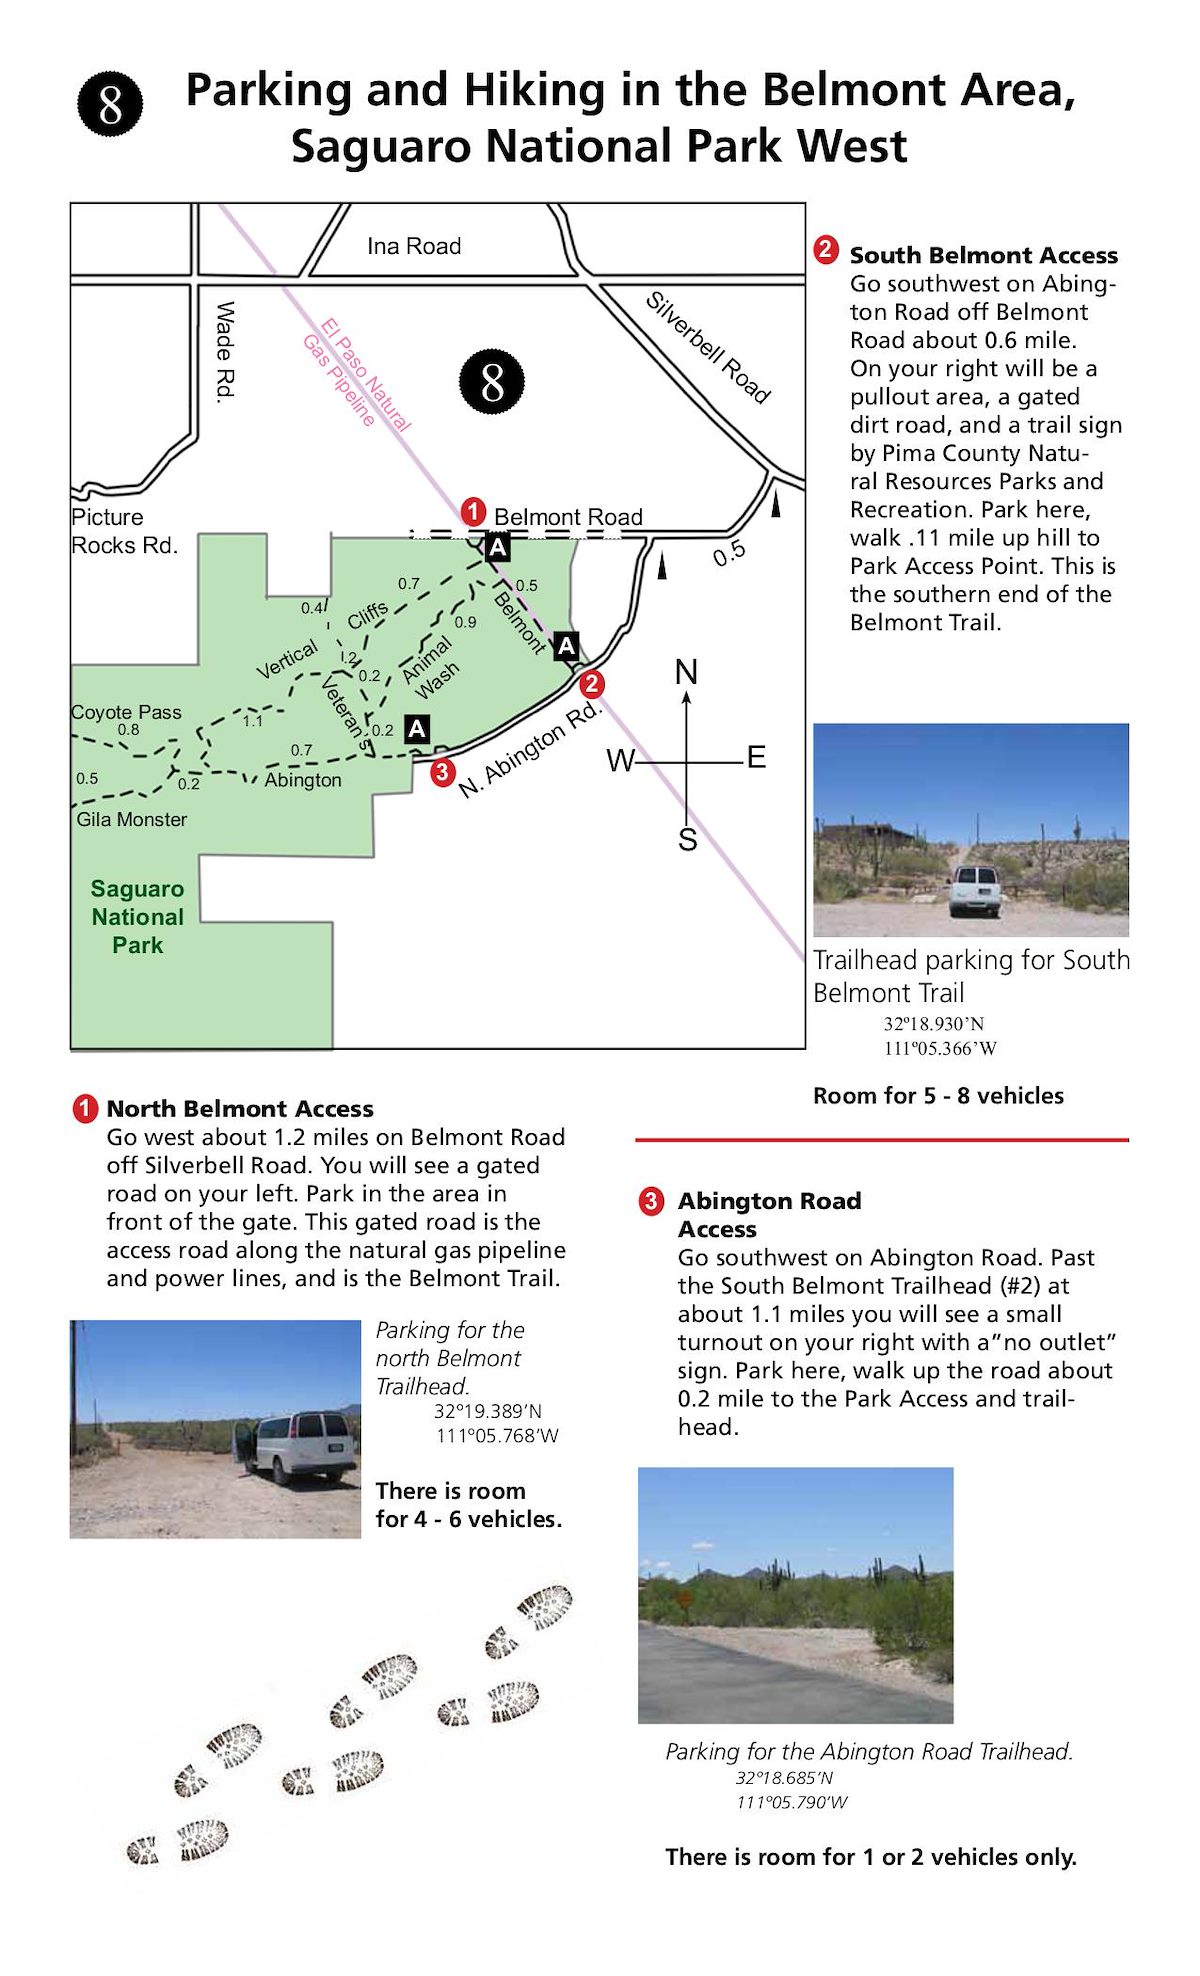 Saguaro National Park Scenic Loop and Belmont Area Trails Parking Map - Page 2